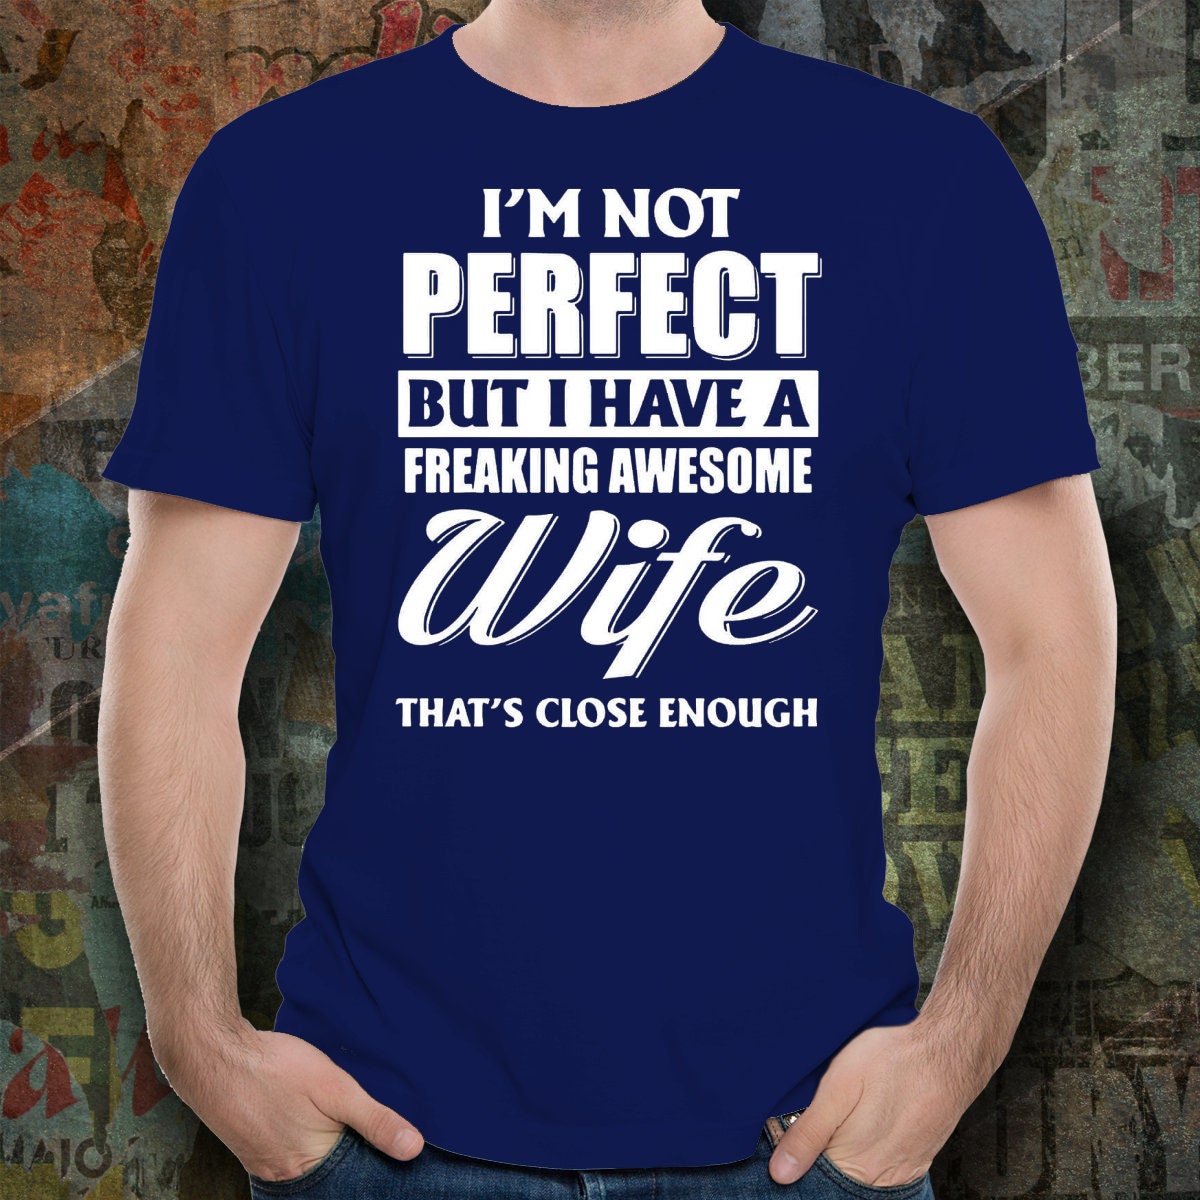 Funny Husband T-shirt/ Funny Shirt for Husband/ I'm Not Perfect But I Have  a Freaking Awesome Wife T-shirt/ Gift Shirt For Husband B-day